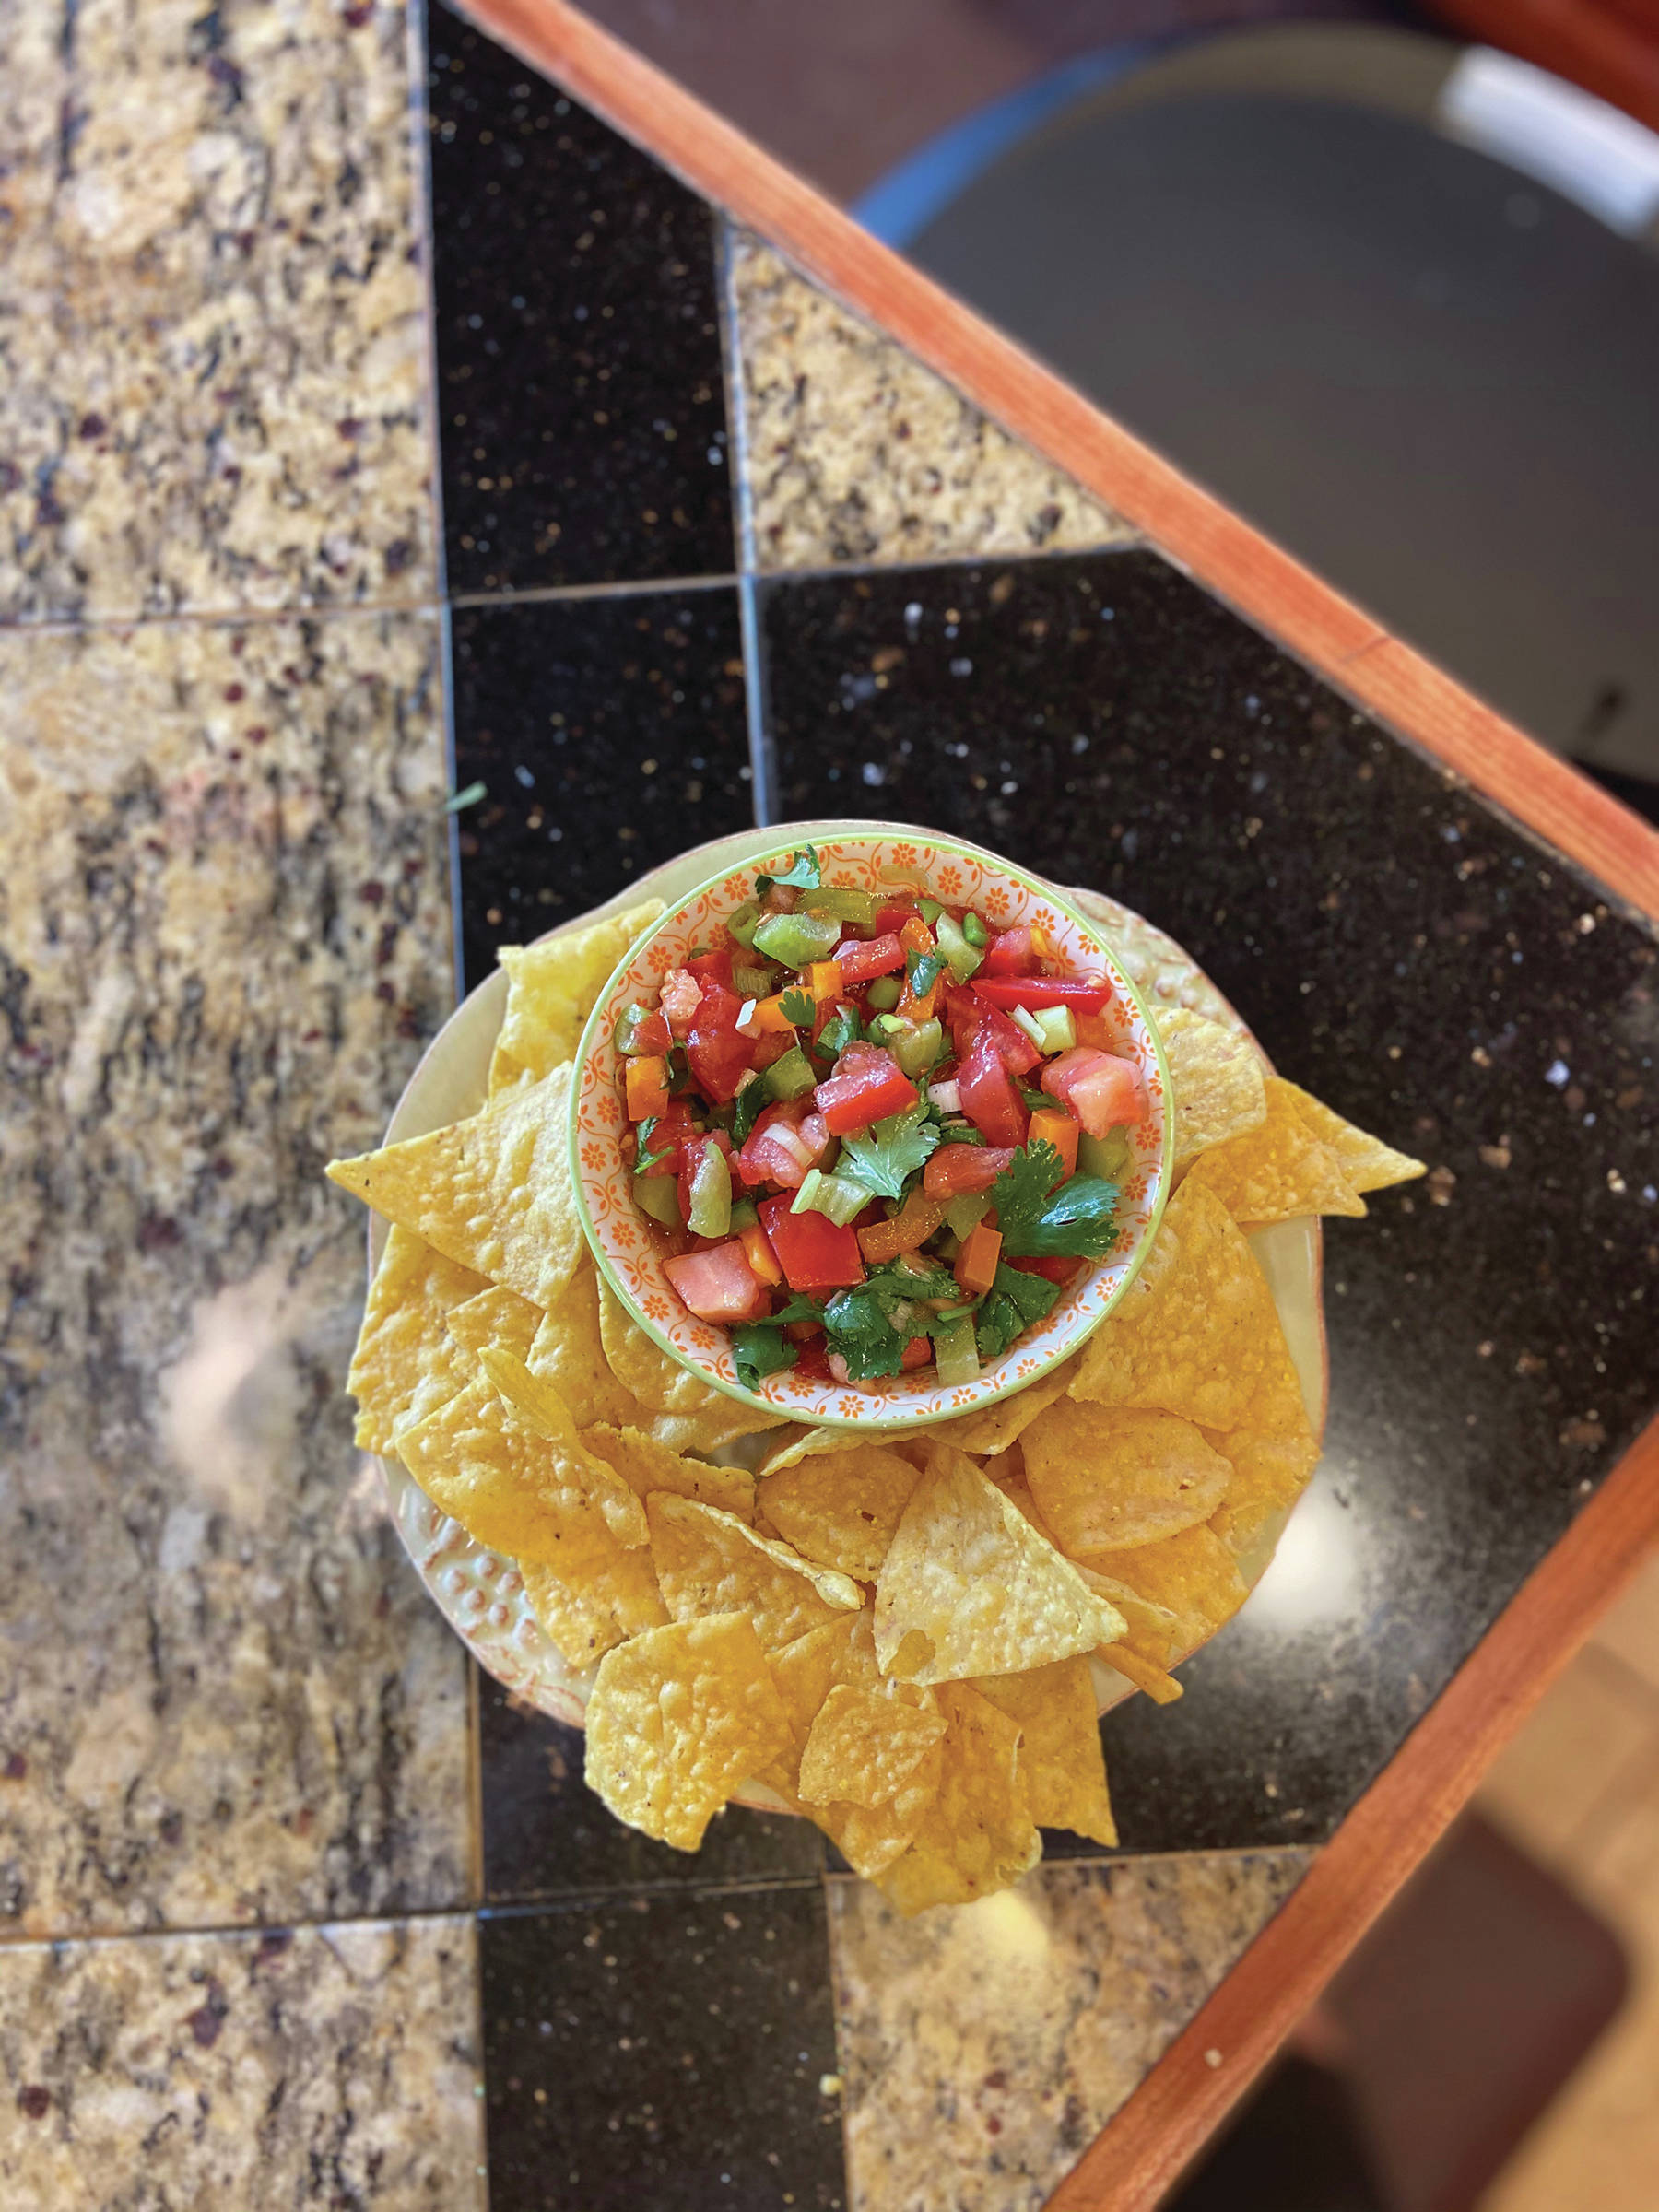 Pico de Gallo is a quick snack made best with fresh ingredients. Teri Robl whipped up this batch on April 5, 2020, in her Homer, Alaska kitchen. (Photo by Teri Robl)